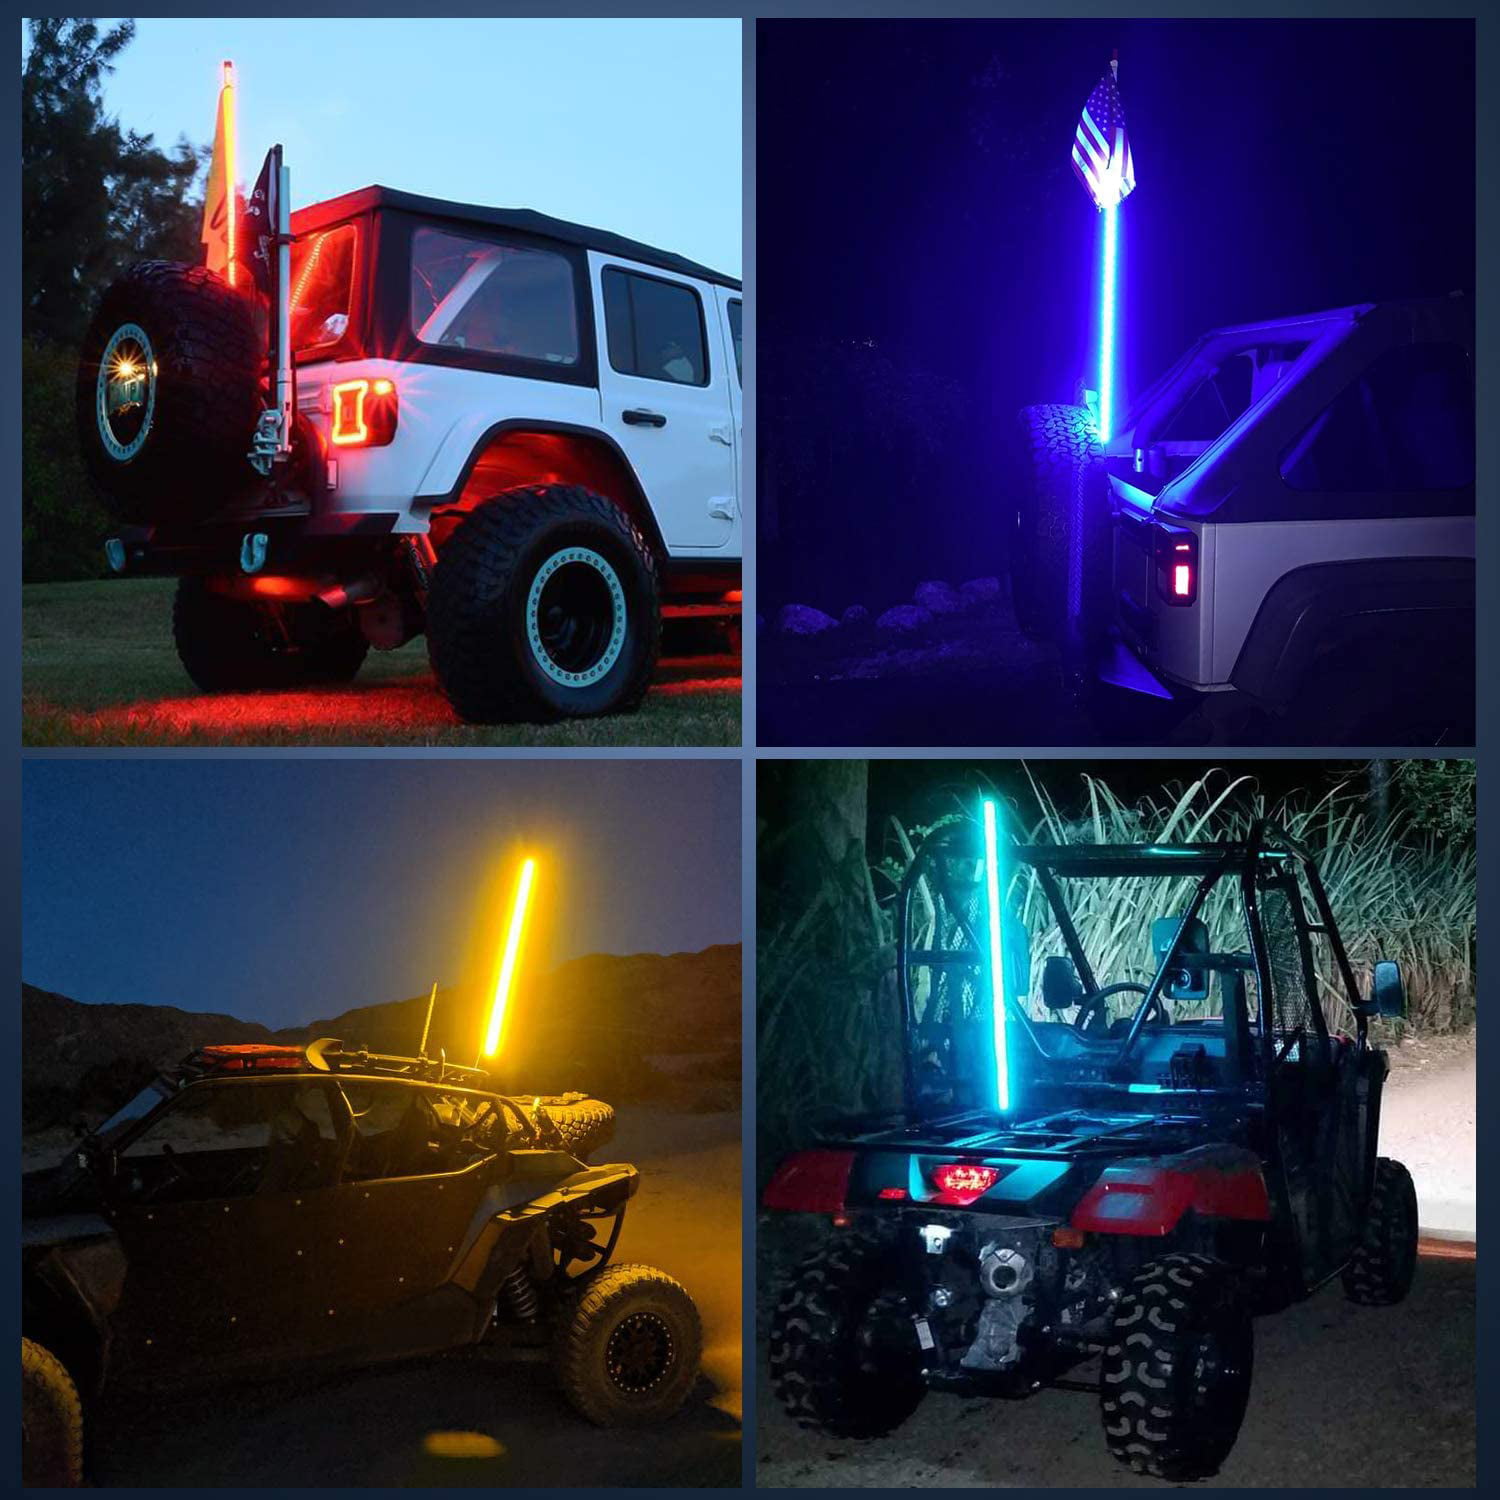 Teochew-LED 2PCS 4FT Smoked Black LED Whip Lights with RF Remote Control Spiral RGB Dancing/Chasing Light Antenna LED Whips for UTV ATV Off Road Polaris RZR Truck 4X4 SXS Can-am Dune Vehicle 